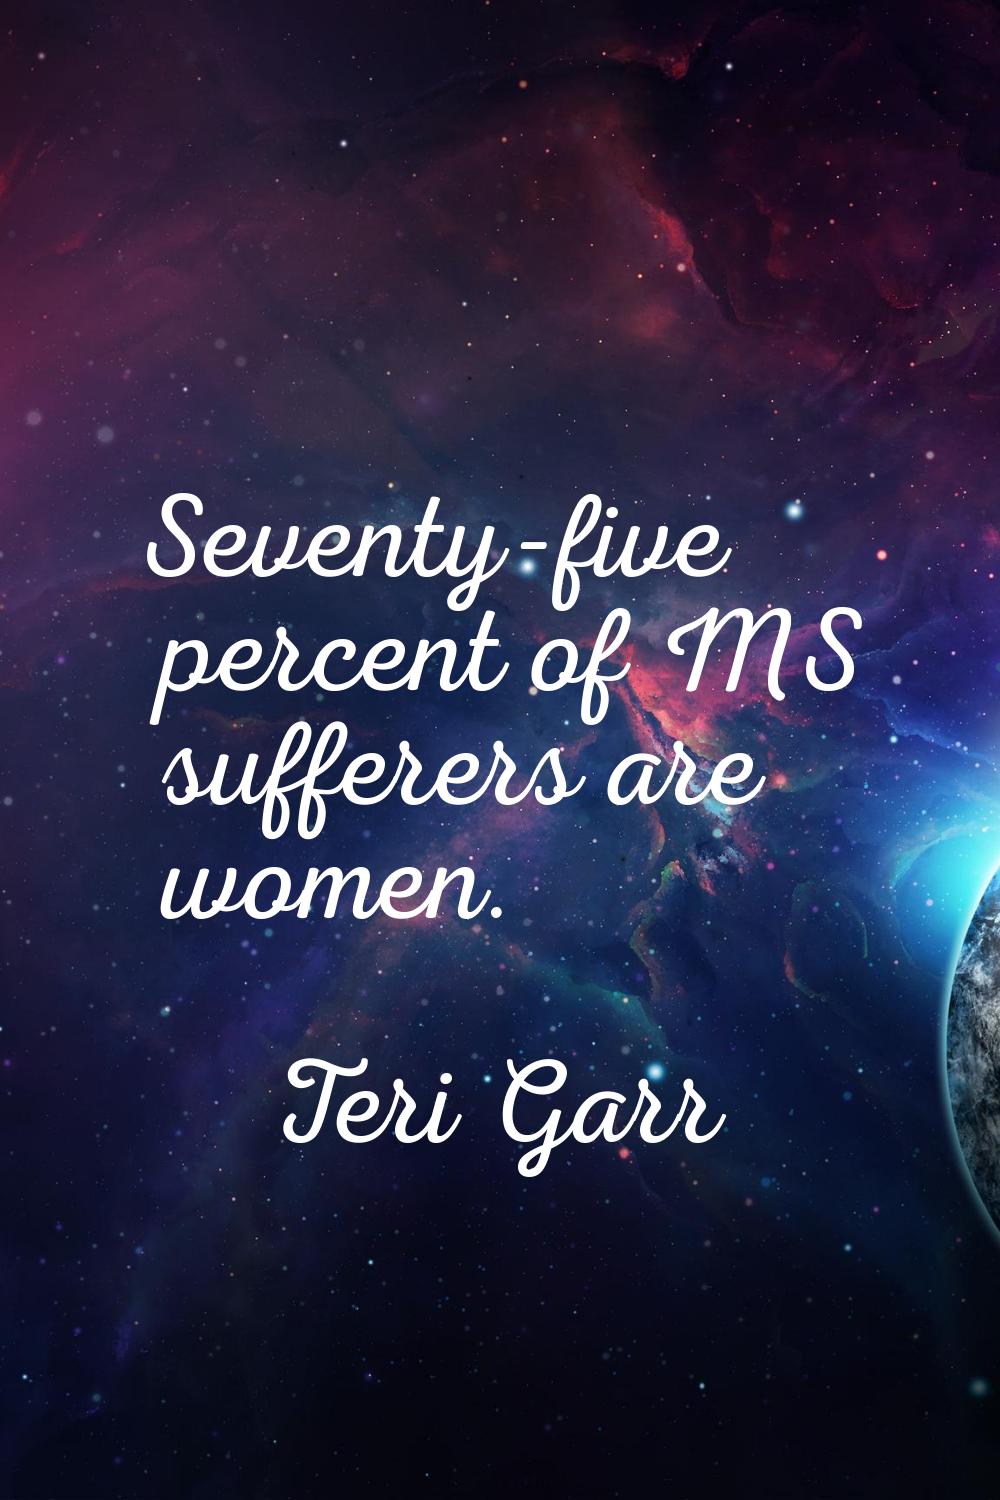 Seventy-five percent of MS sufferers are women.